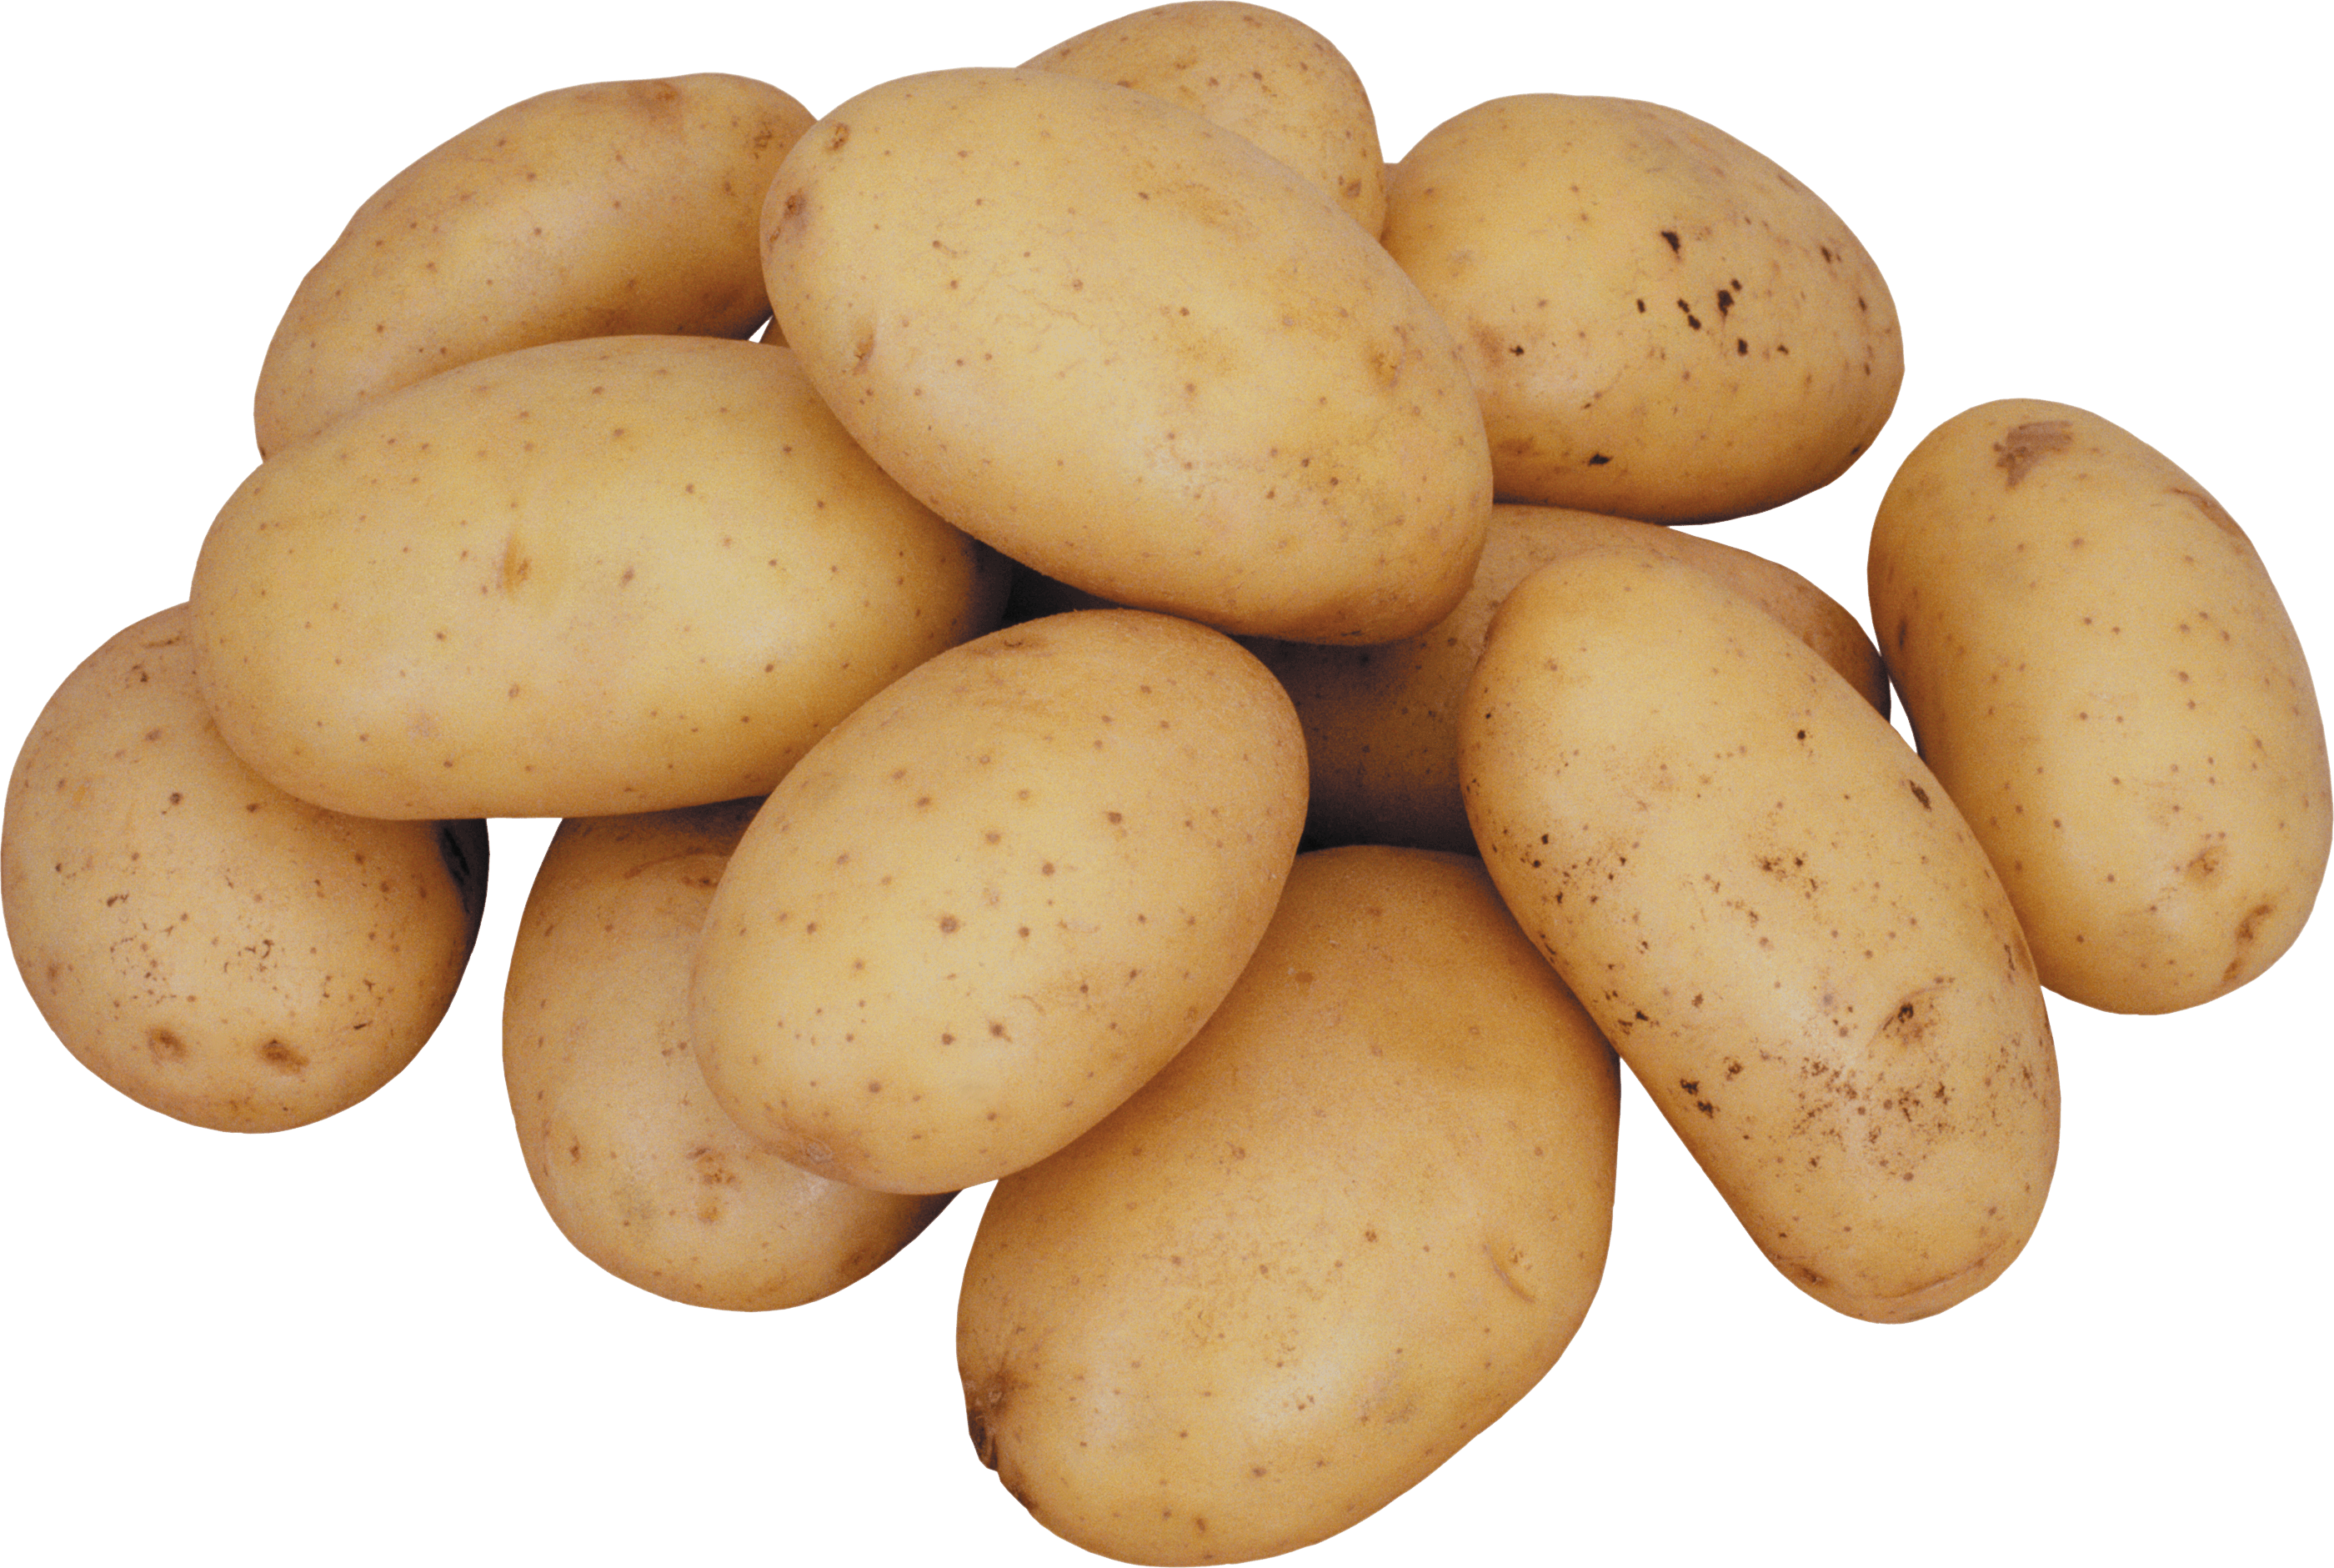 Potato Png Images Pictures Download PNG Image, Potato PNG - Free PNG